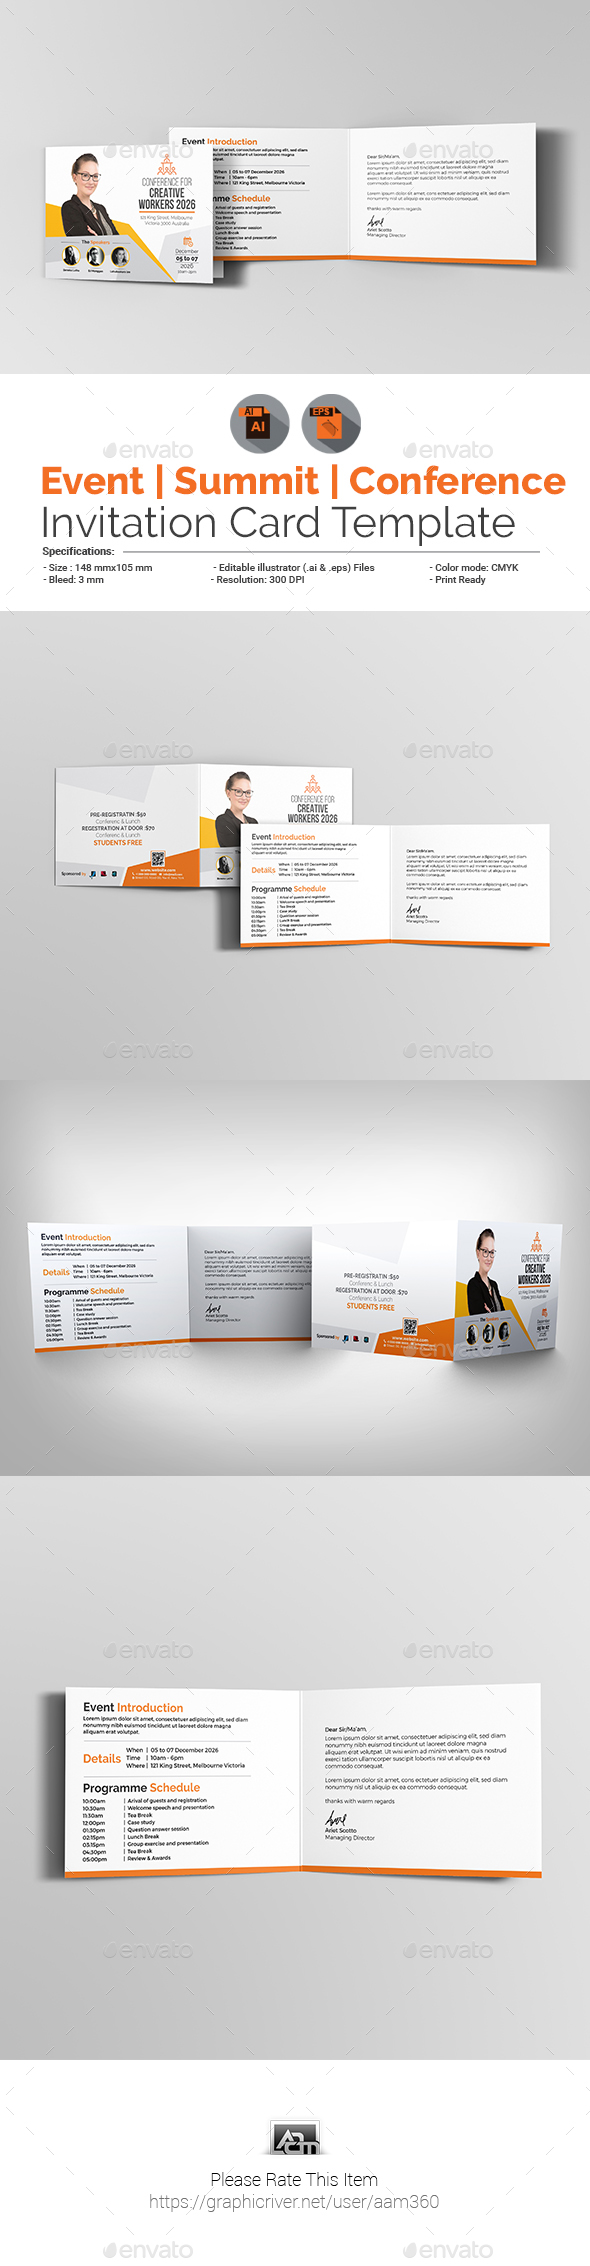 Event/Conference Invitation Card Template With Regard To Seminar Invitation Card Template